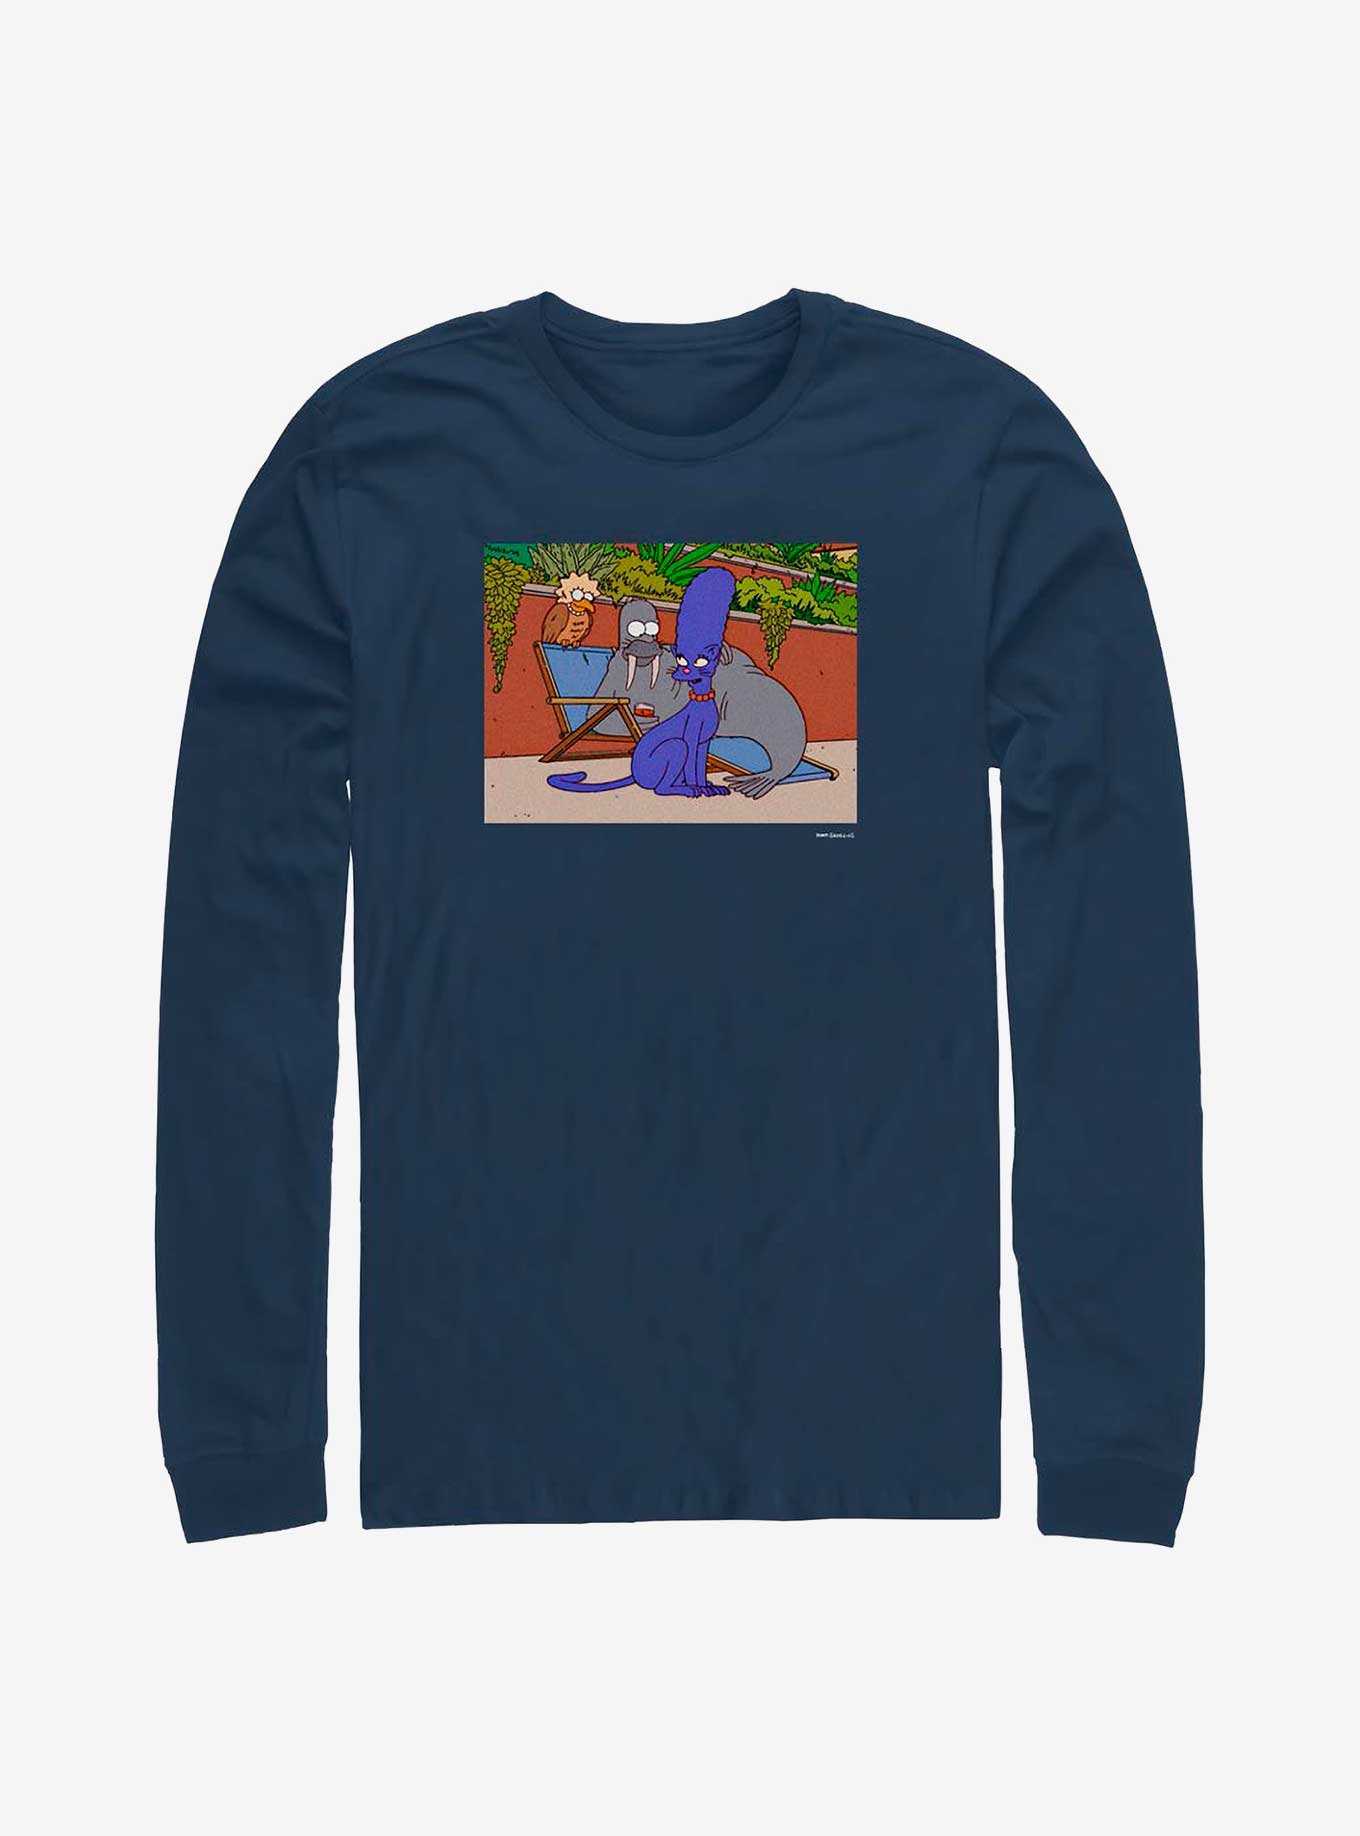 The Simpsons Treehouse Of Horror XIII Long-Sleeve T-Shirt, , hi-res